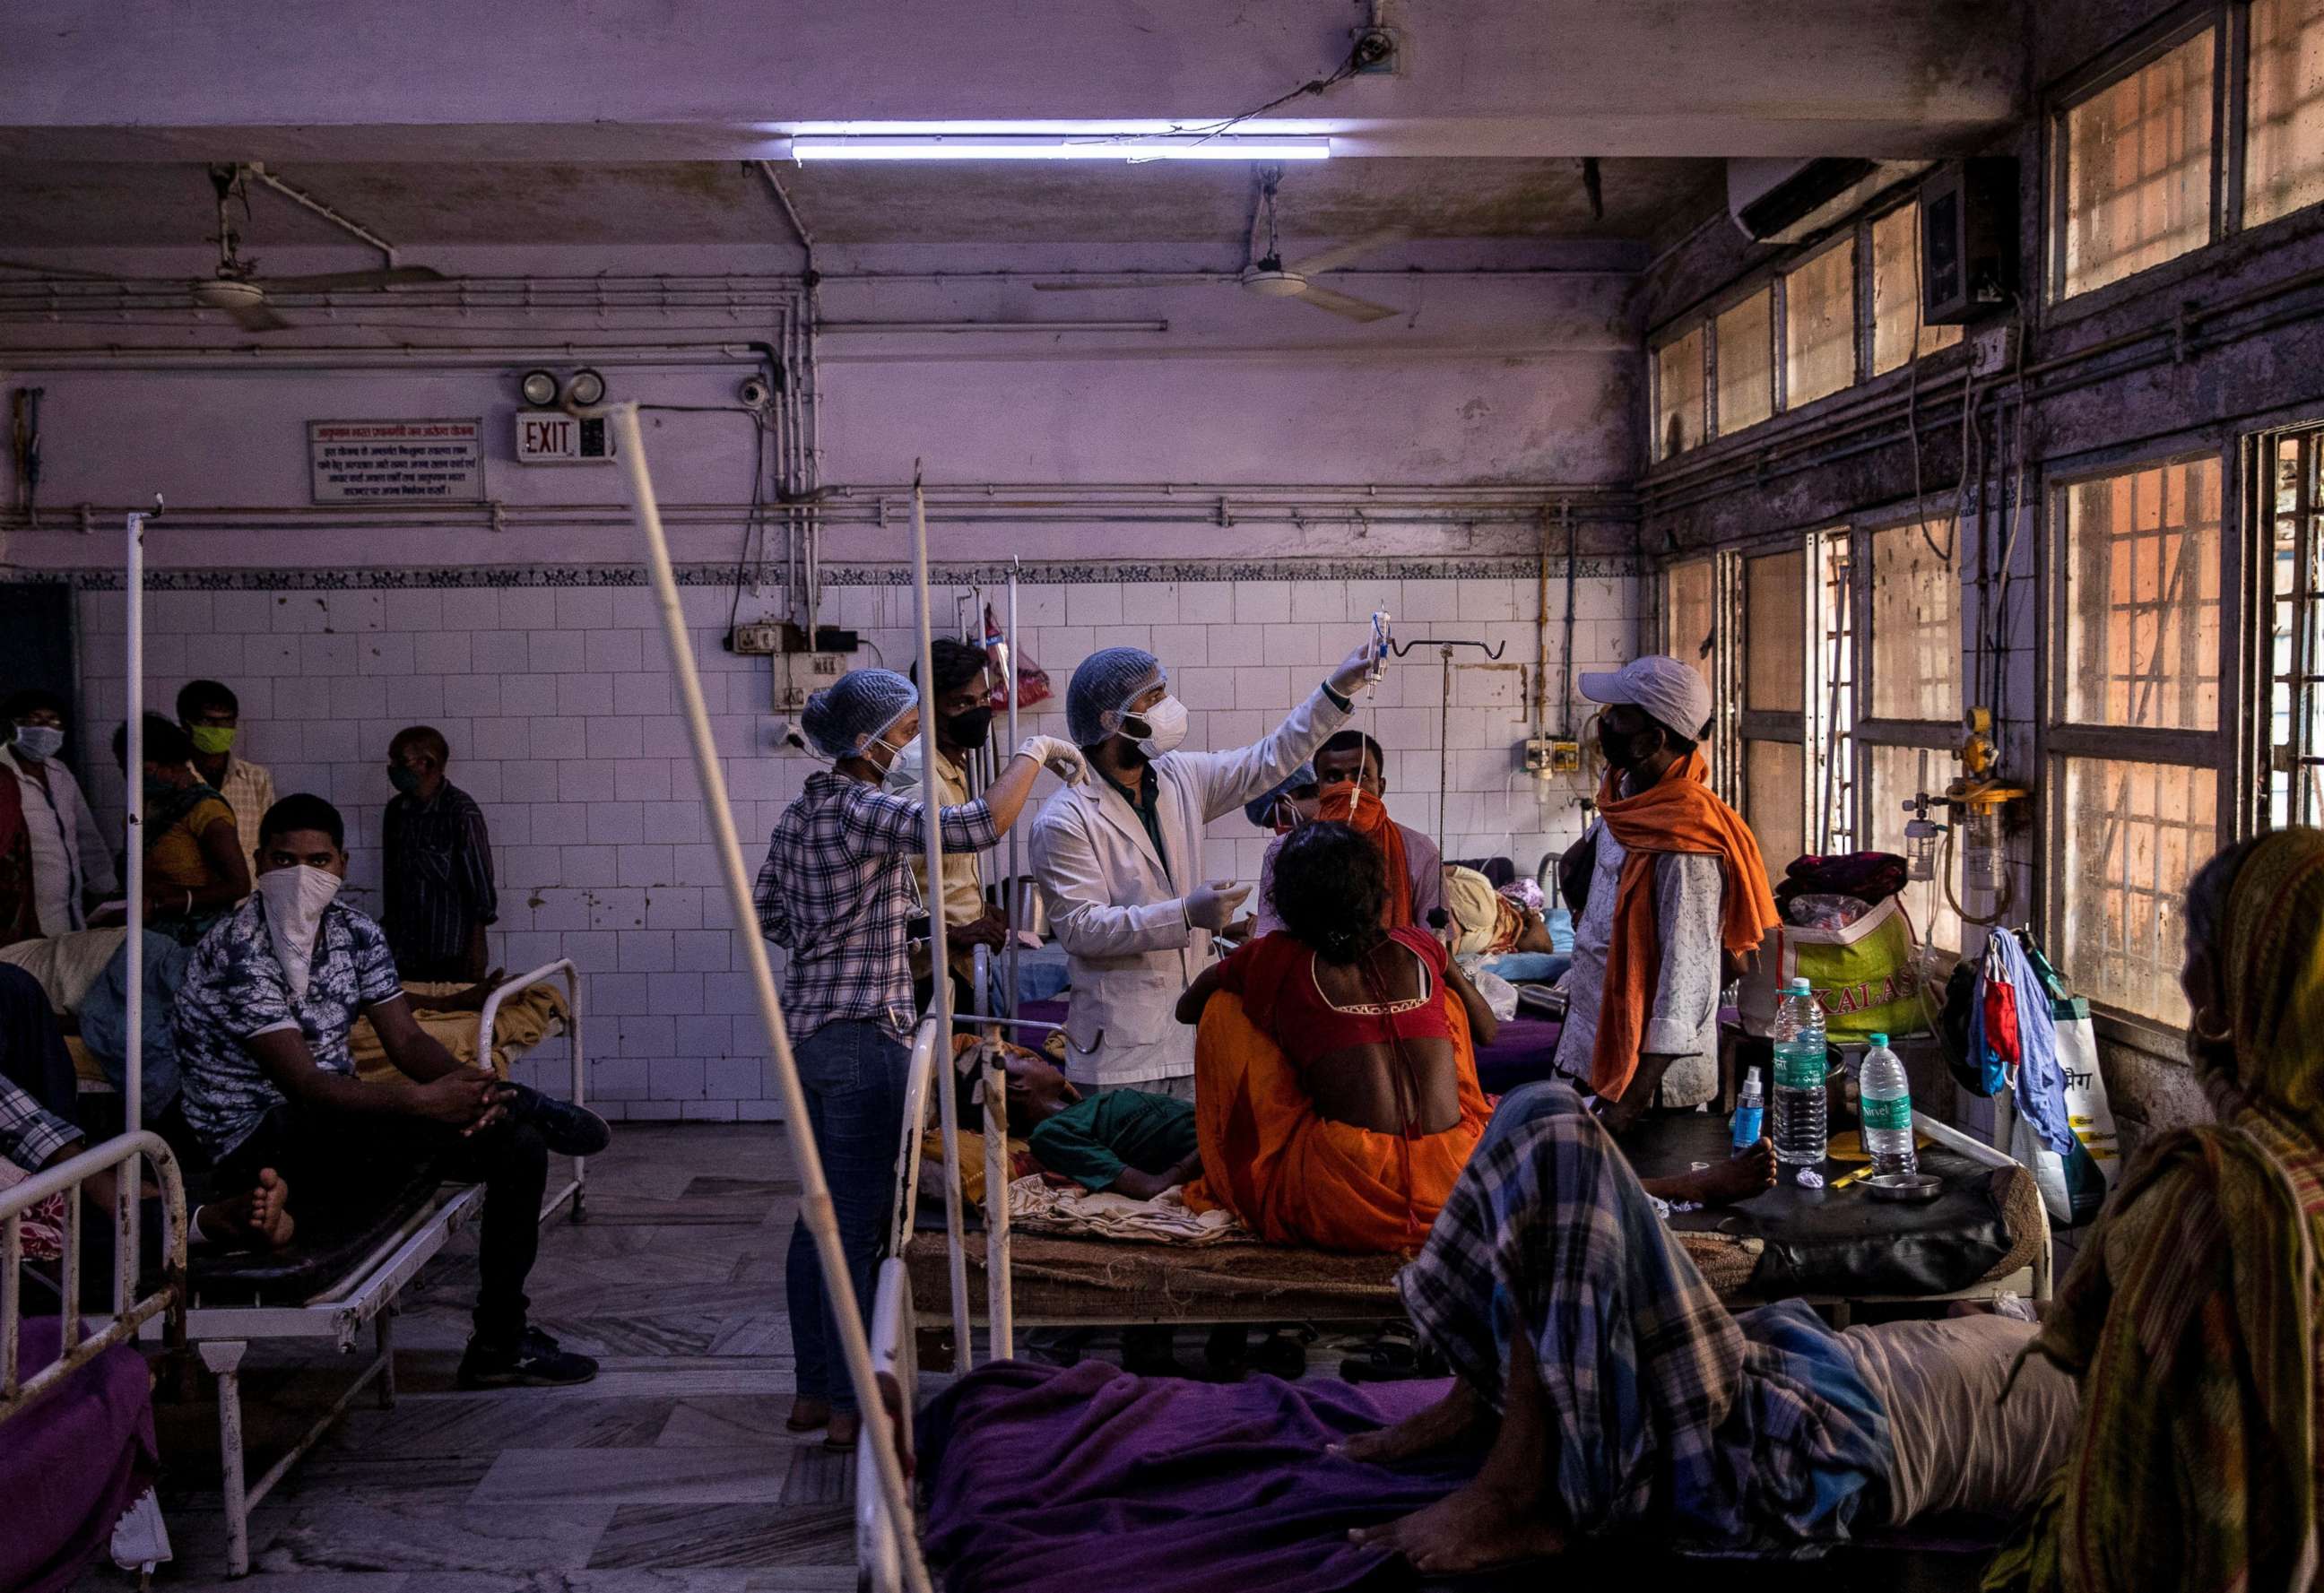 PHOTO: Medical staff treat a patient inside the emergency ward of Jawahar Lal Nehru Medical College and Hospital during the coronavirus pandemic in Bhagalpur, Bihar, India, July 27, 2020.